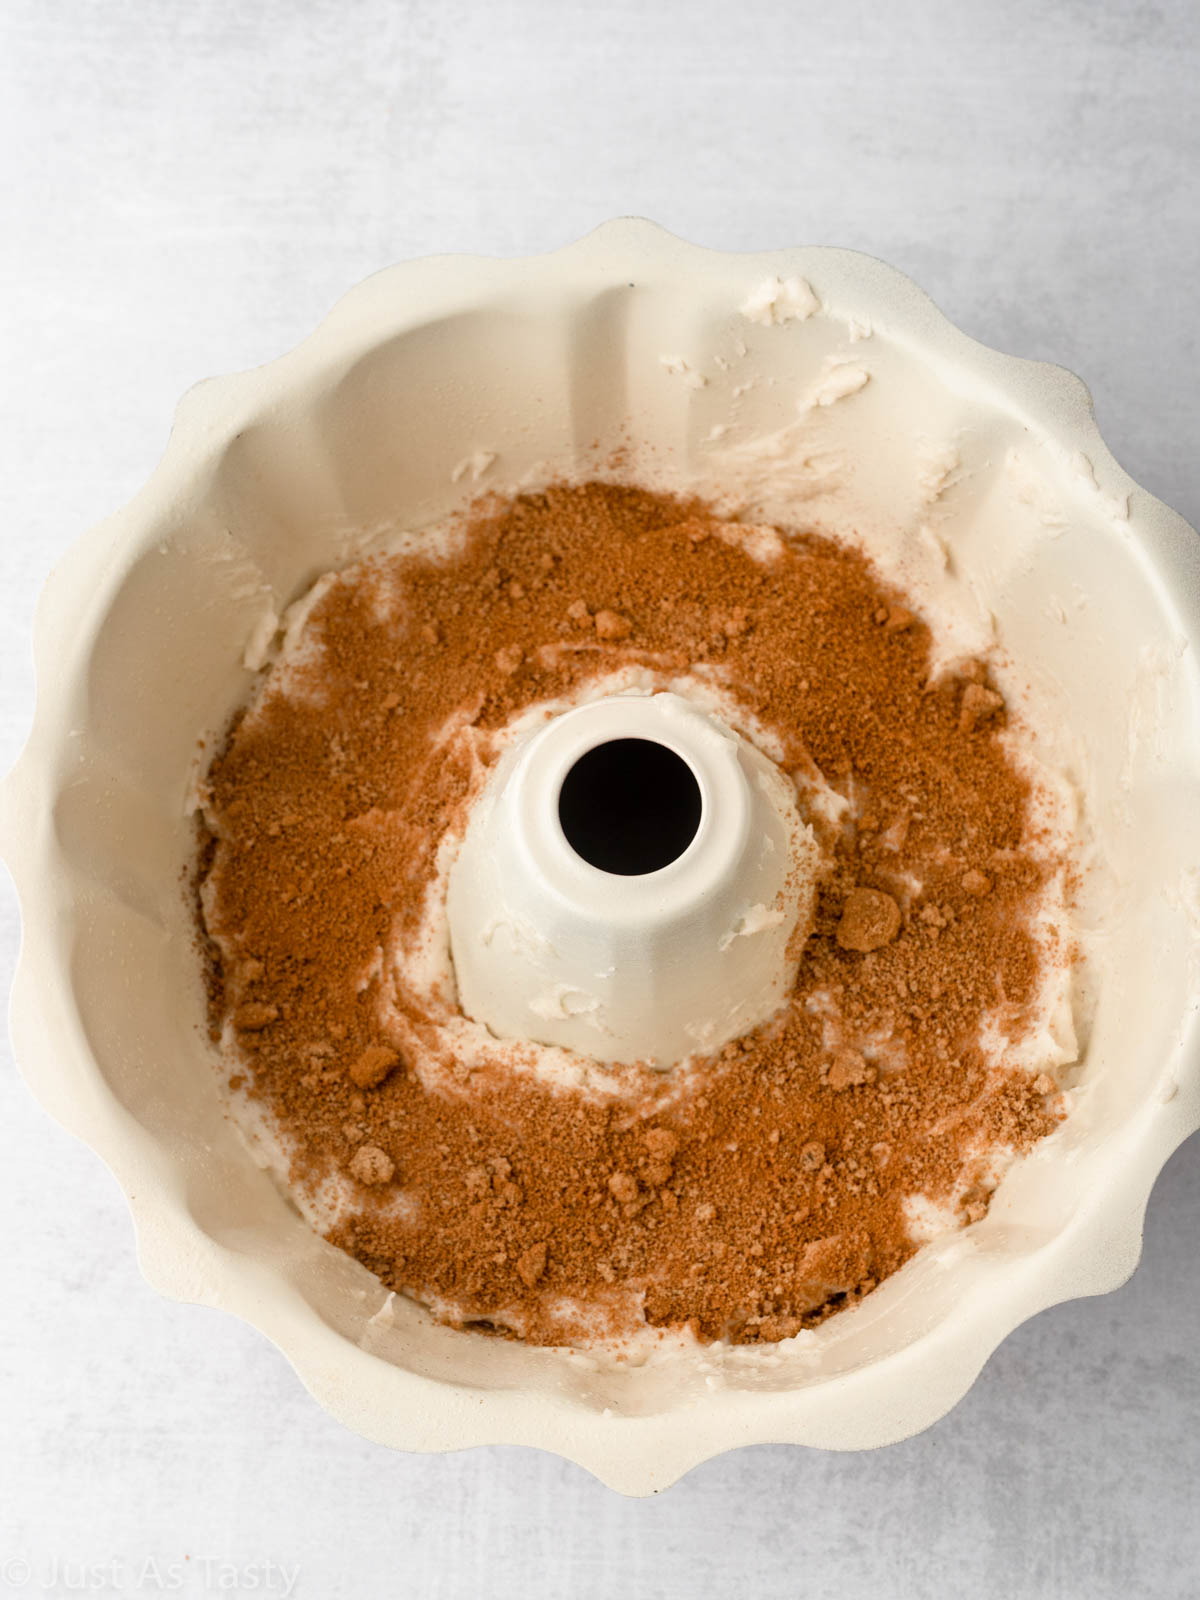 Cake batter topped with cinnamon sugar in a bundt pan.